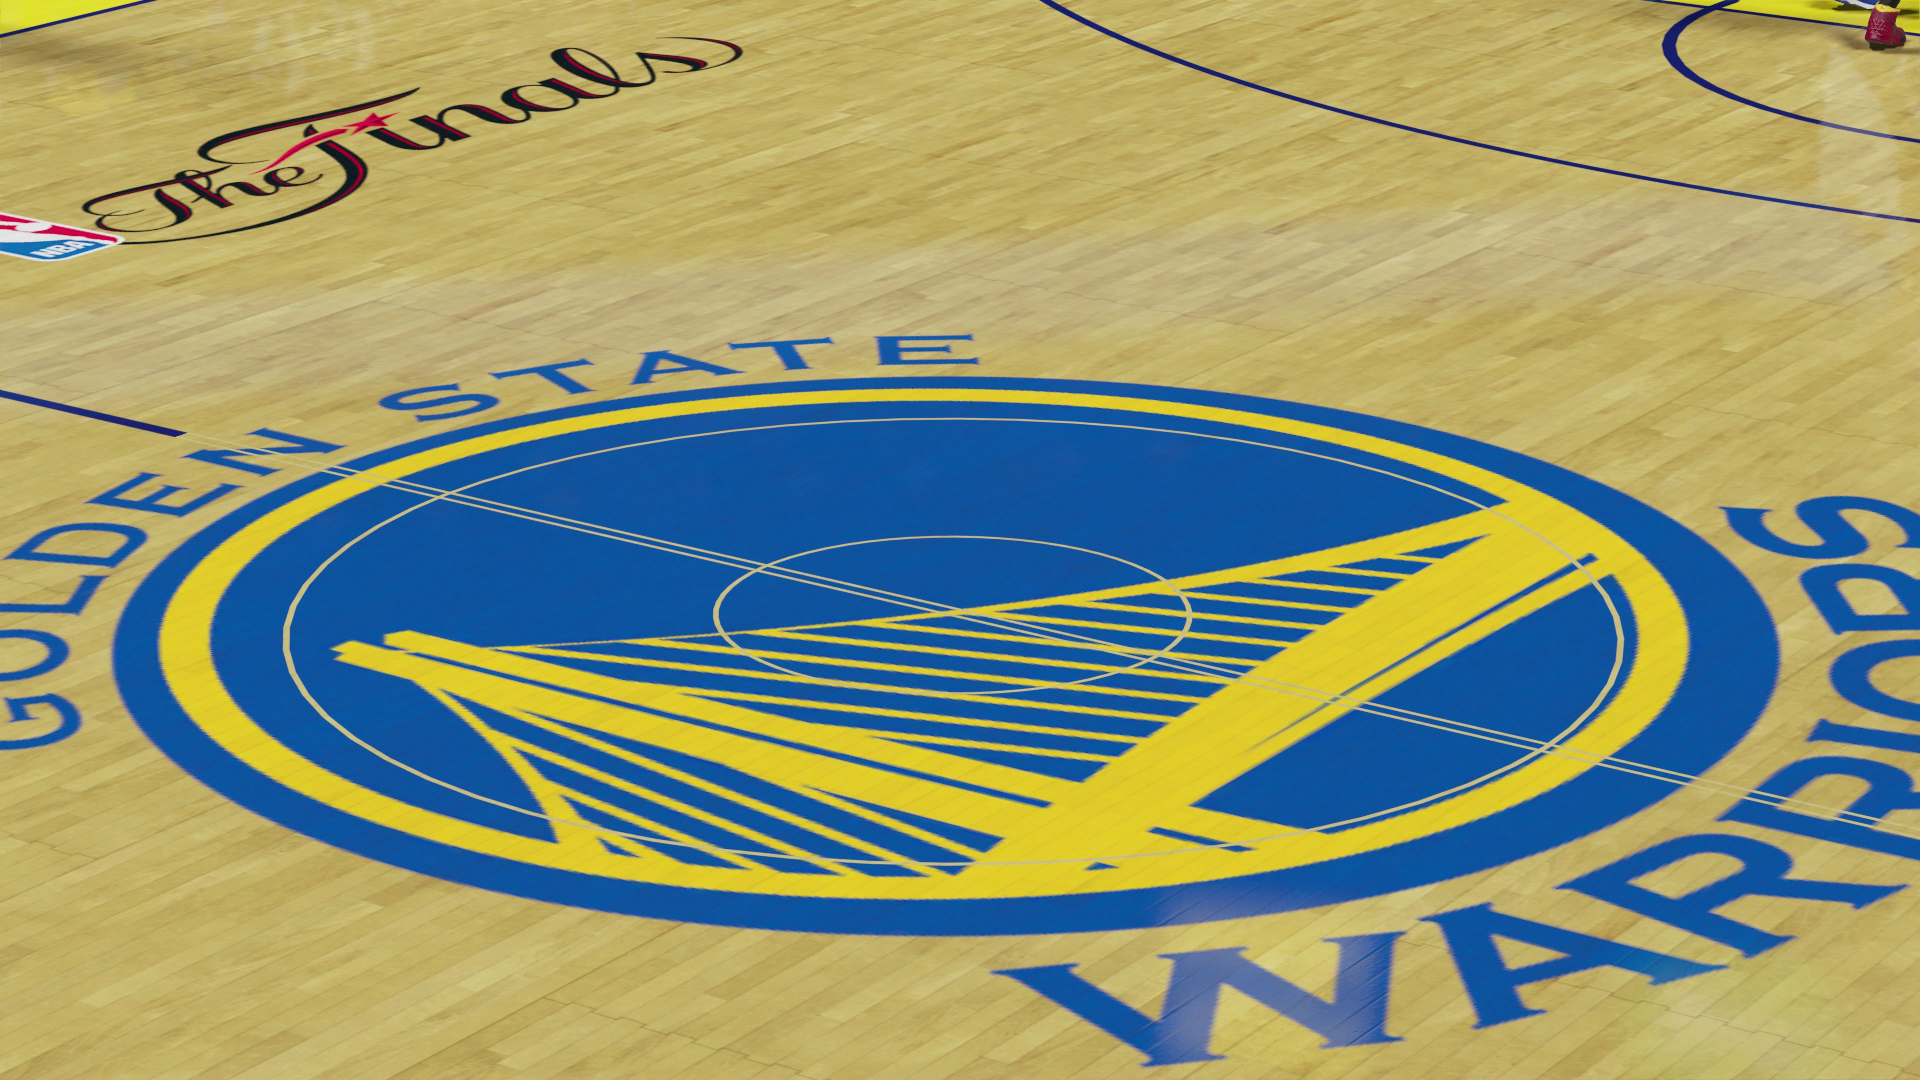 Hit the Pass We simulate the 2015 NBA Finals with NBA 2K15